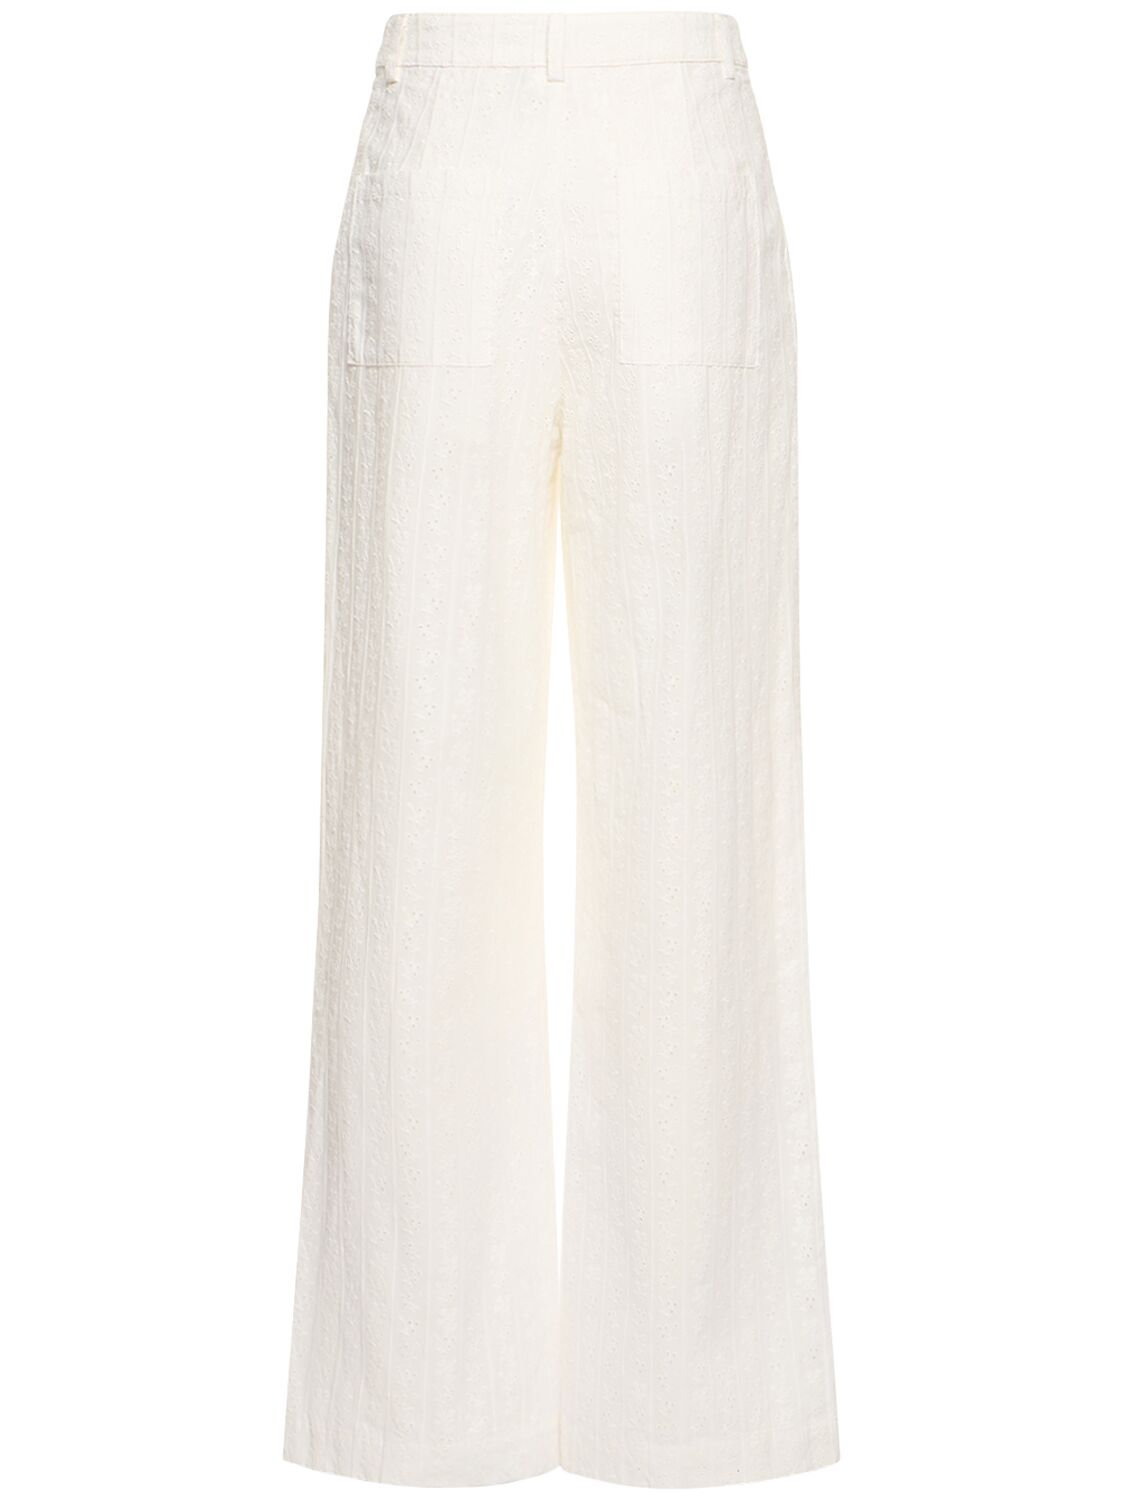 Shop Weworewhat Cotton Eyelet Lace Wide Pants In White